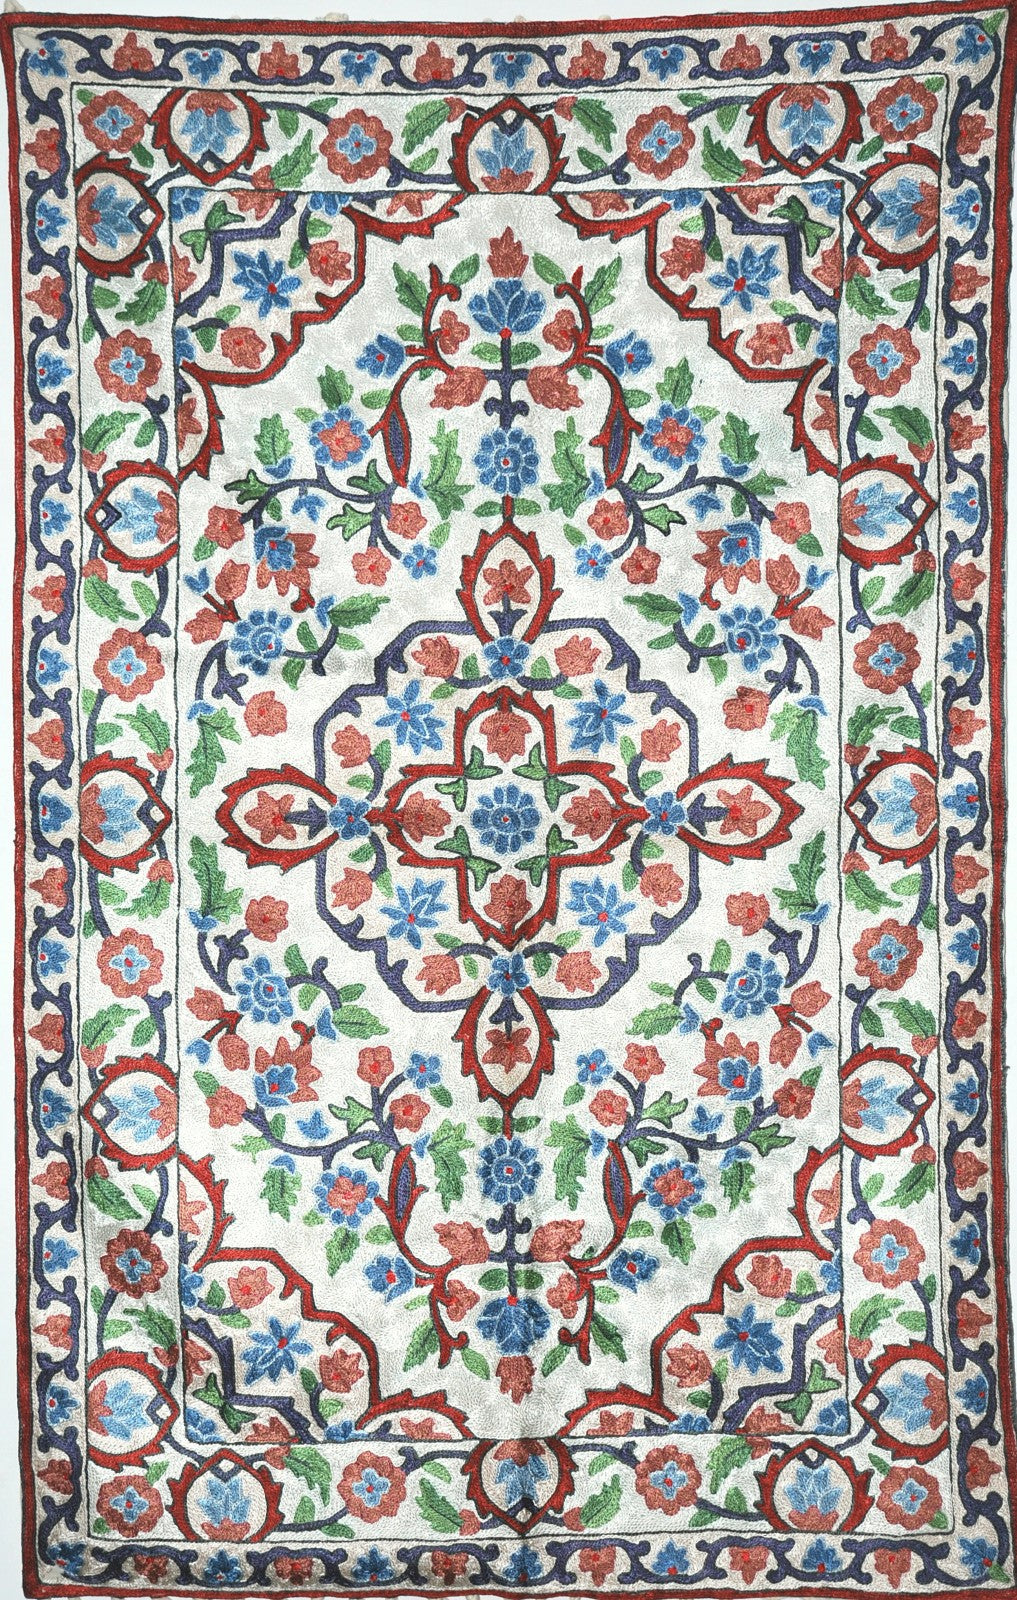 ChainStitch Tapestry Silk Wall Hanging Area Rug, Multicolor Embroidery 2.5x4 feet #CWR10113